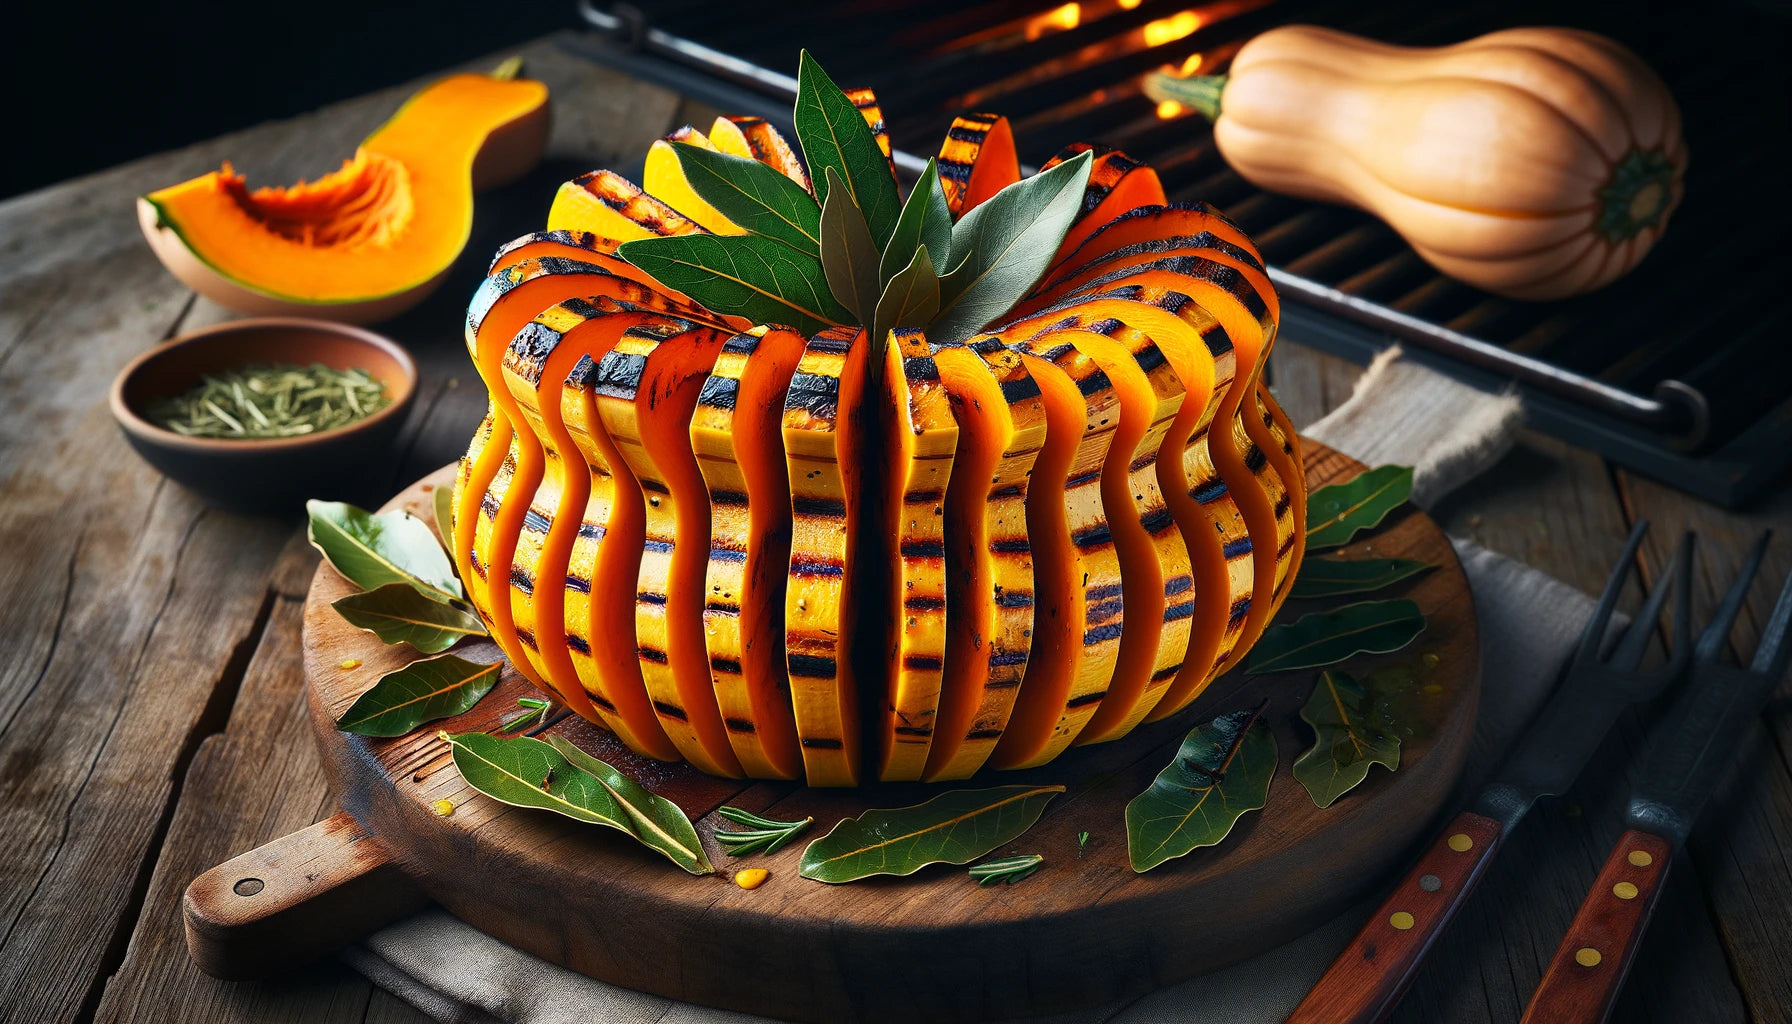 Grilled Hasselbeck Butternut Squash with Bay Leaves, featuring the squash cut in the Hasselbeck style and grilled to perfection